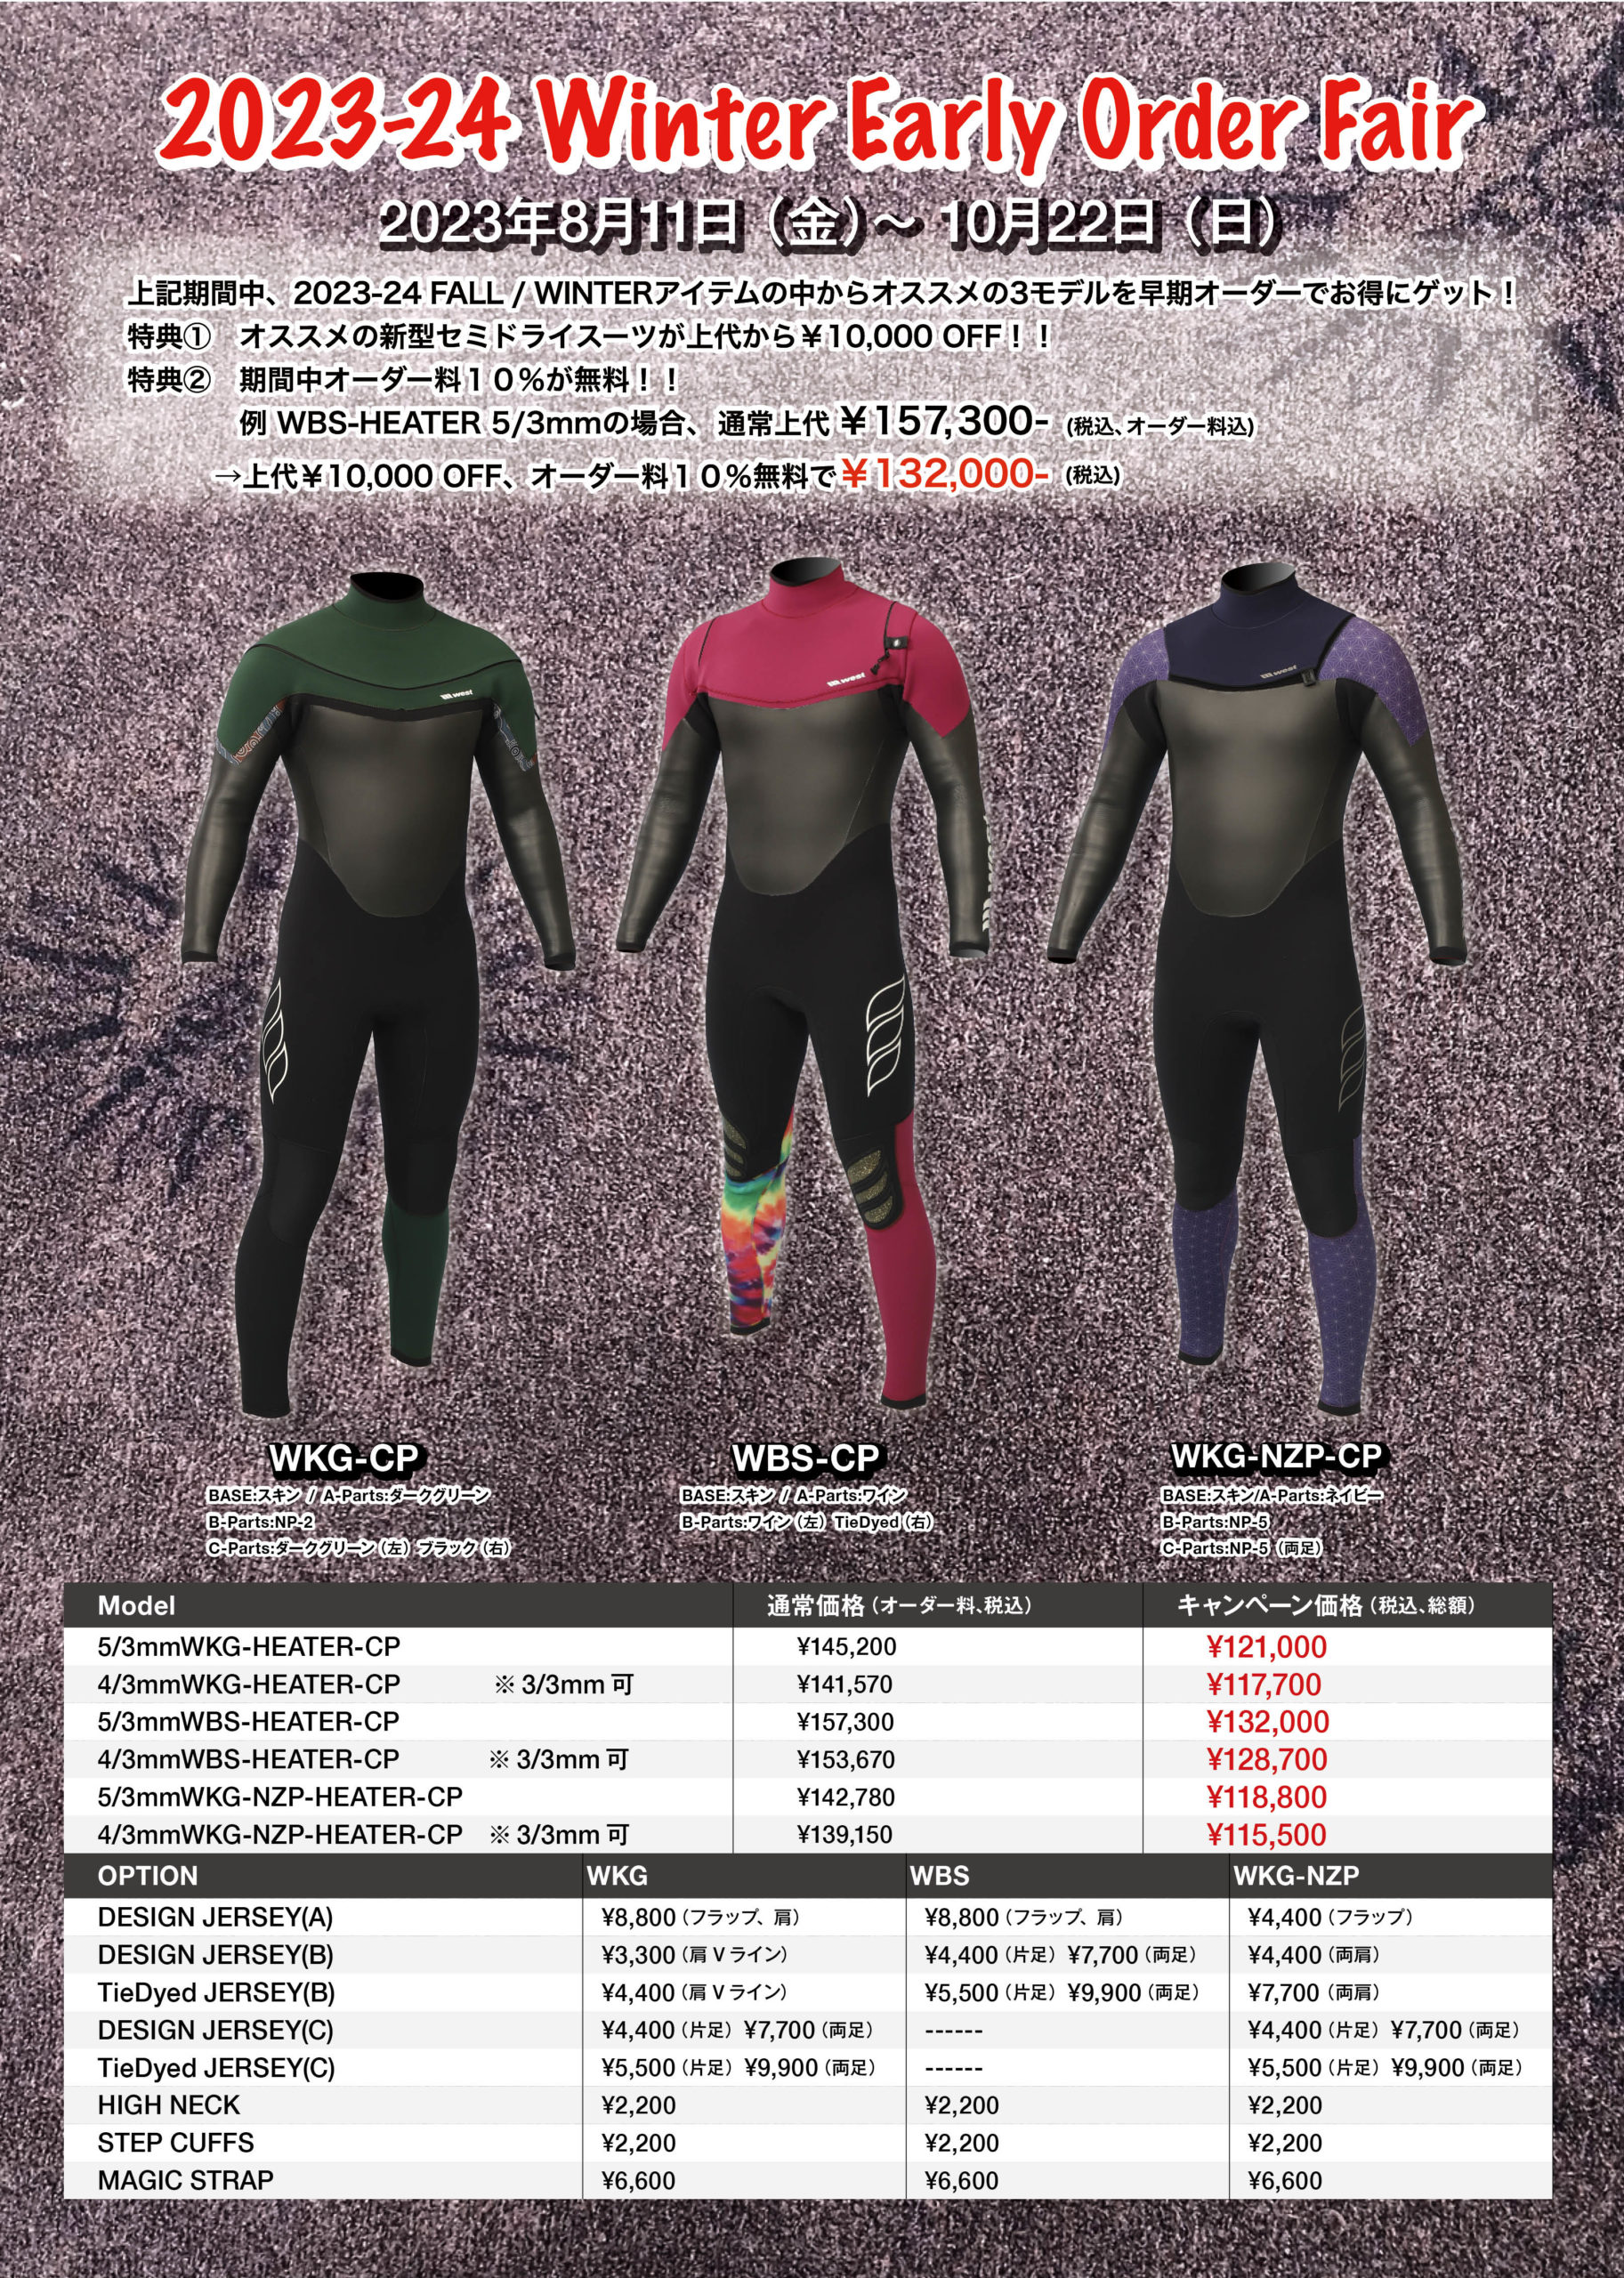 WEST SUITS 2023-2024 冬モデル 早期オーダーキャンペーン